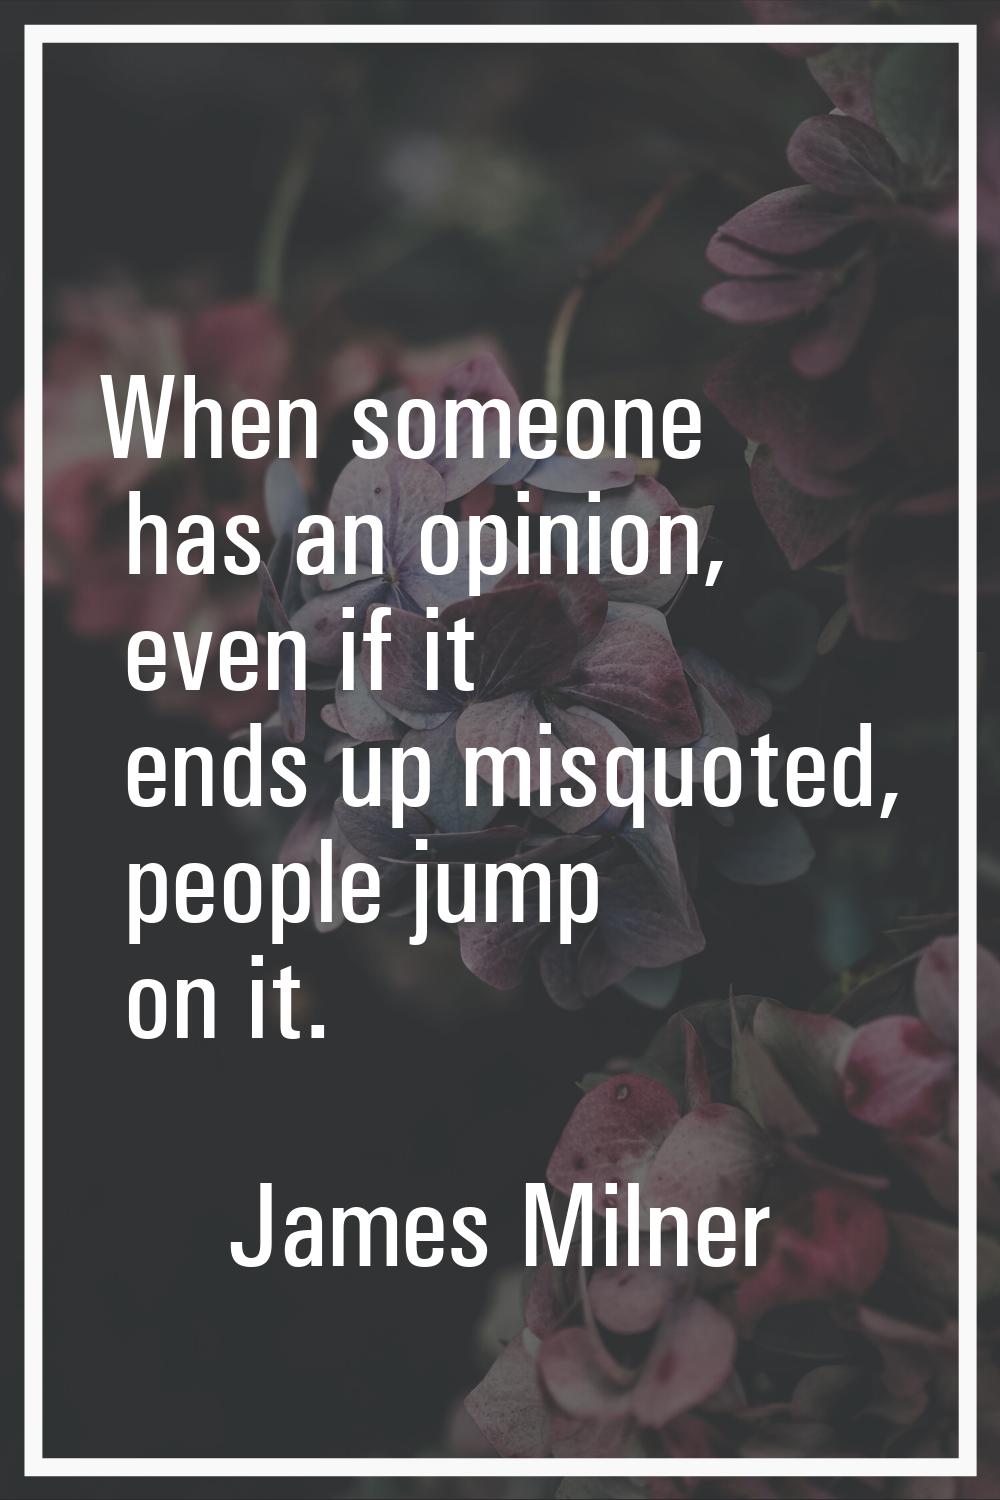 When someone has an opinion, even if it ends up misquoted, people jump on it.